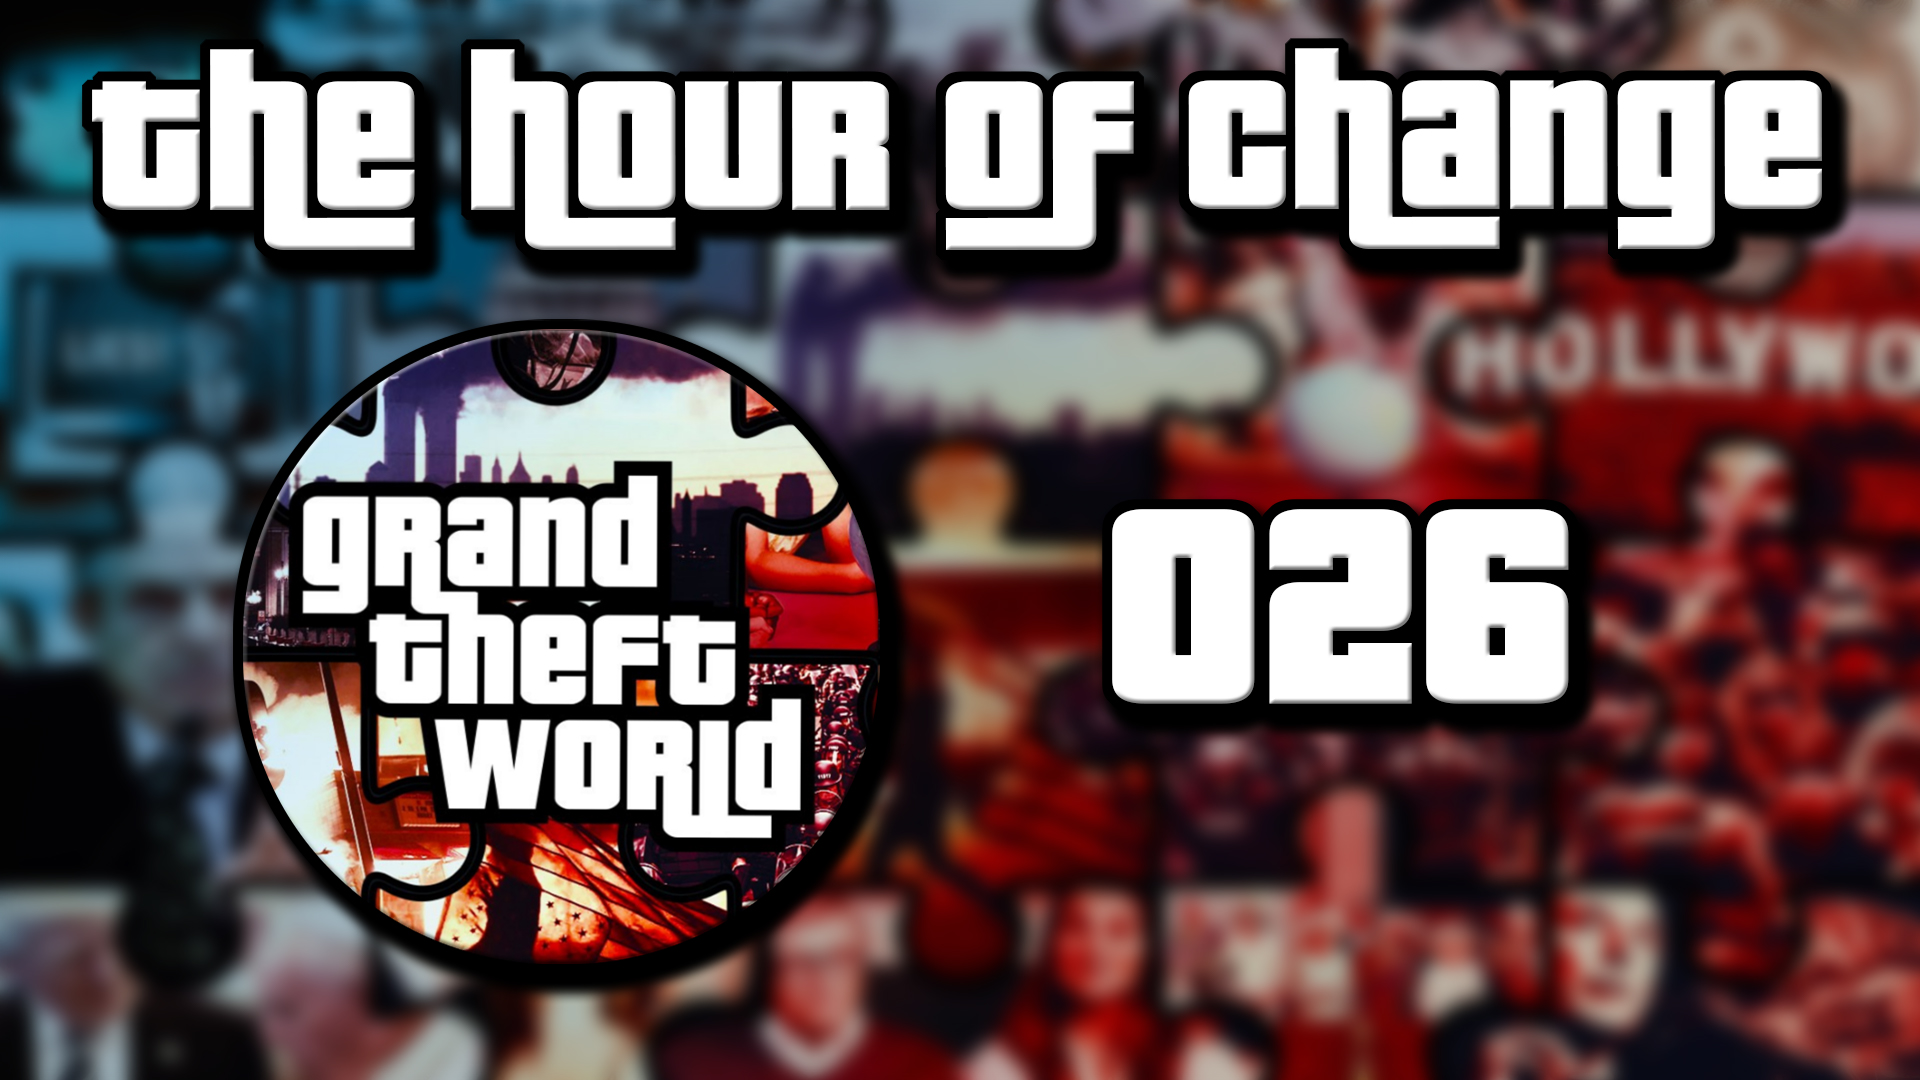 Grand Theft World Podcast 026 | The Hour of Change